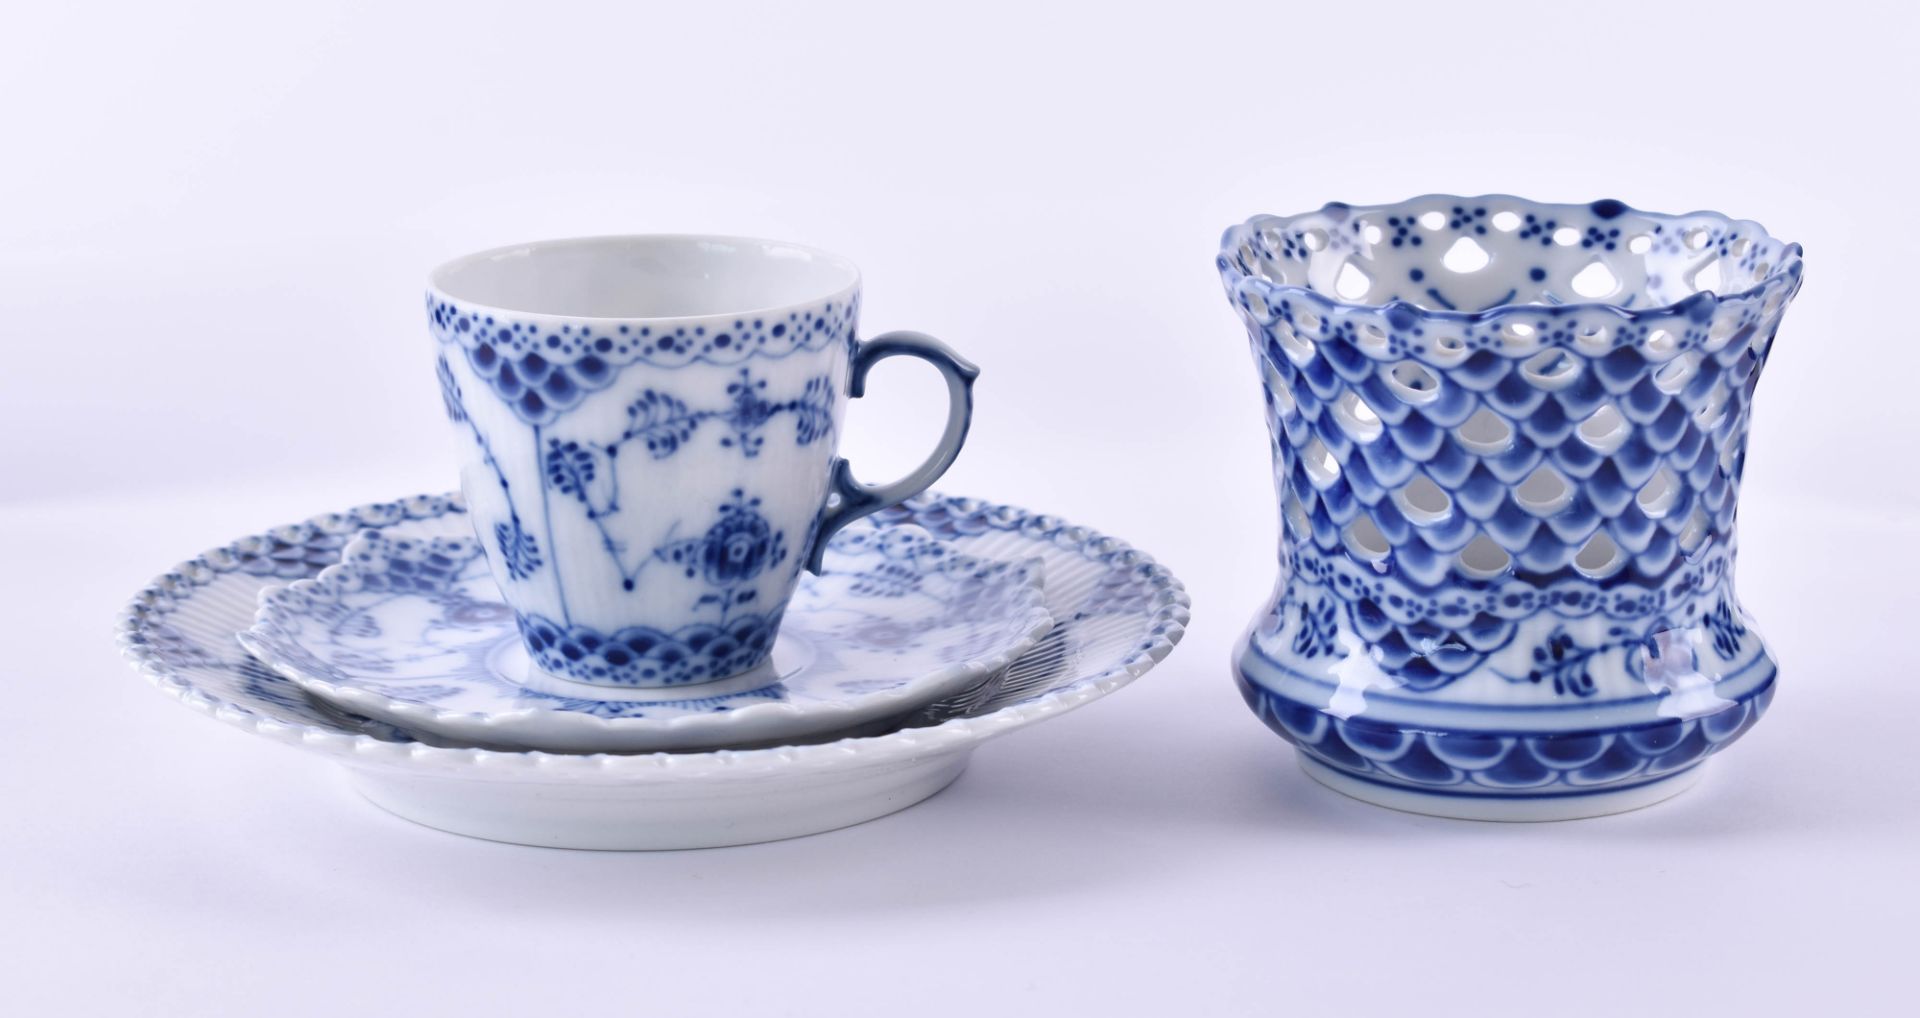 A group of Royal Copenhagen4 pieces, in the typical blue and white painting mocha set and